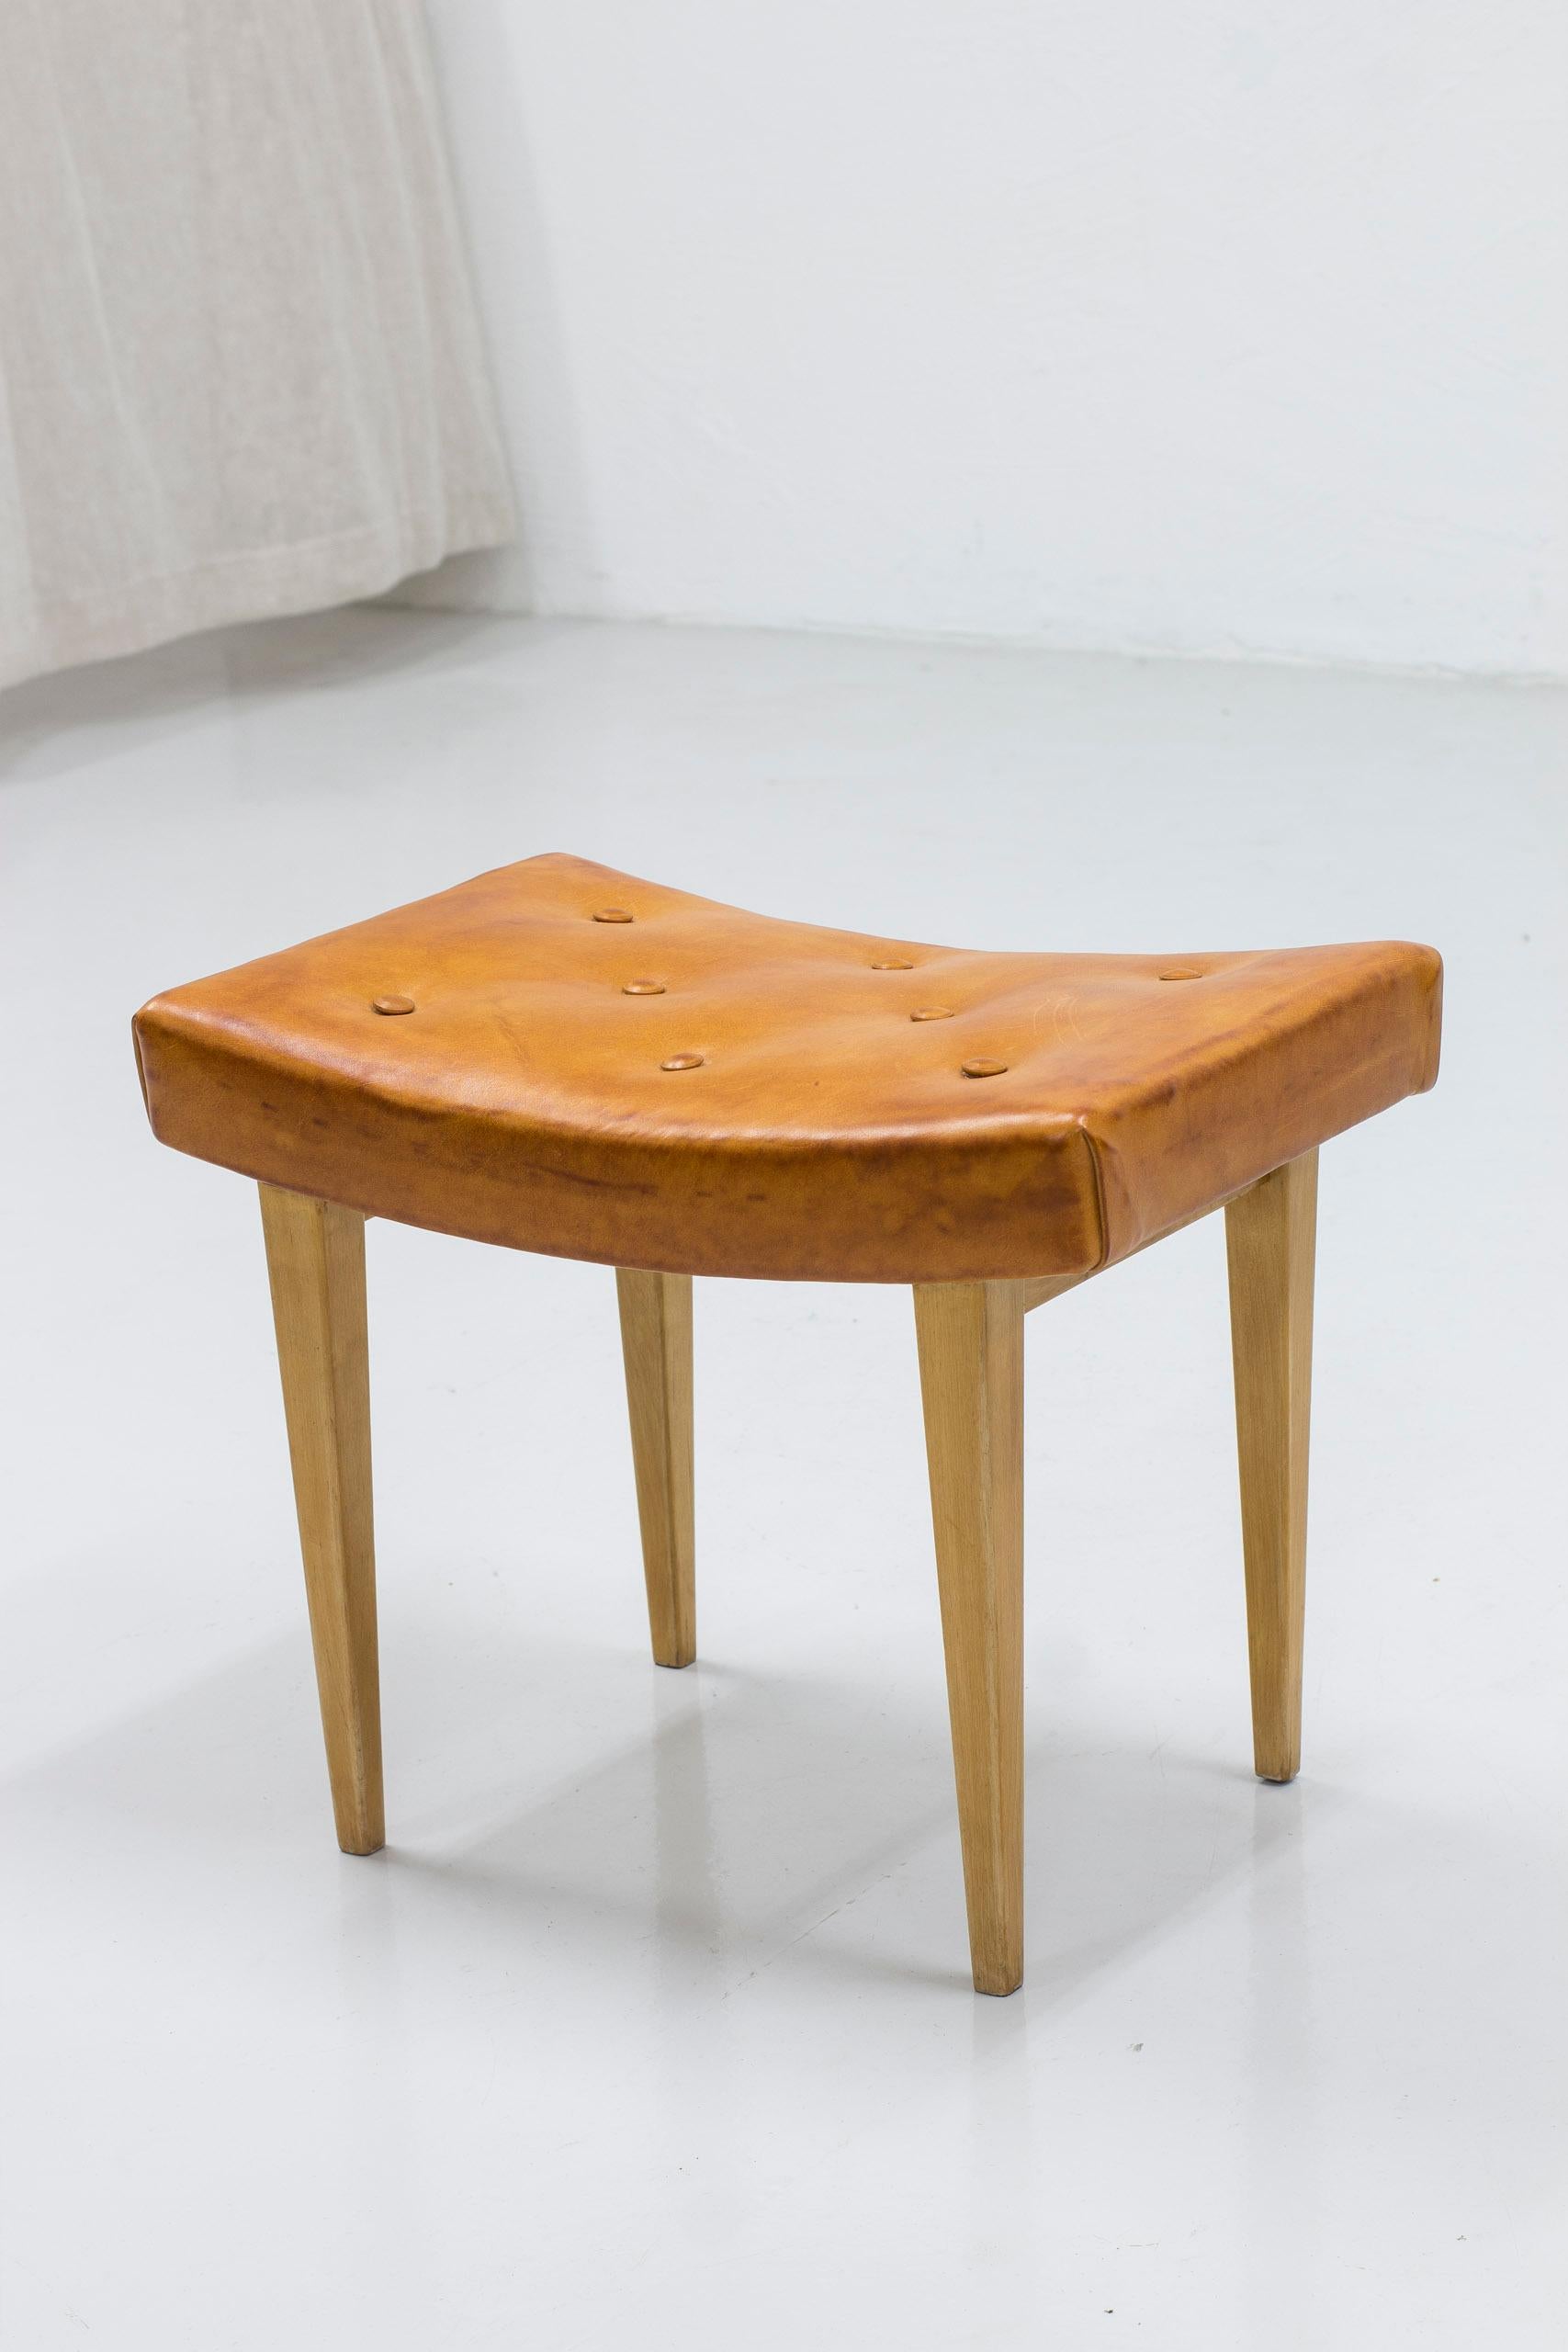 Early stool designed by Bruno Mathsson. Produced by Firma Karl Mathsson in 1941. Very early example with paper label, hand signed BM -41 for the manufacturing  year, 1941. Made from birch and upholstered in cognac leather. Very good vintage